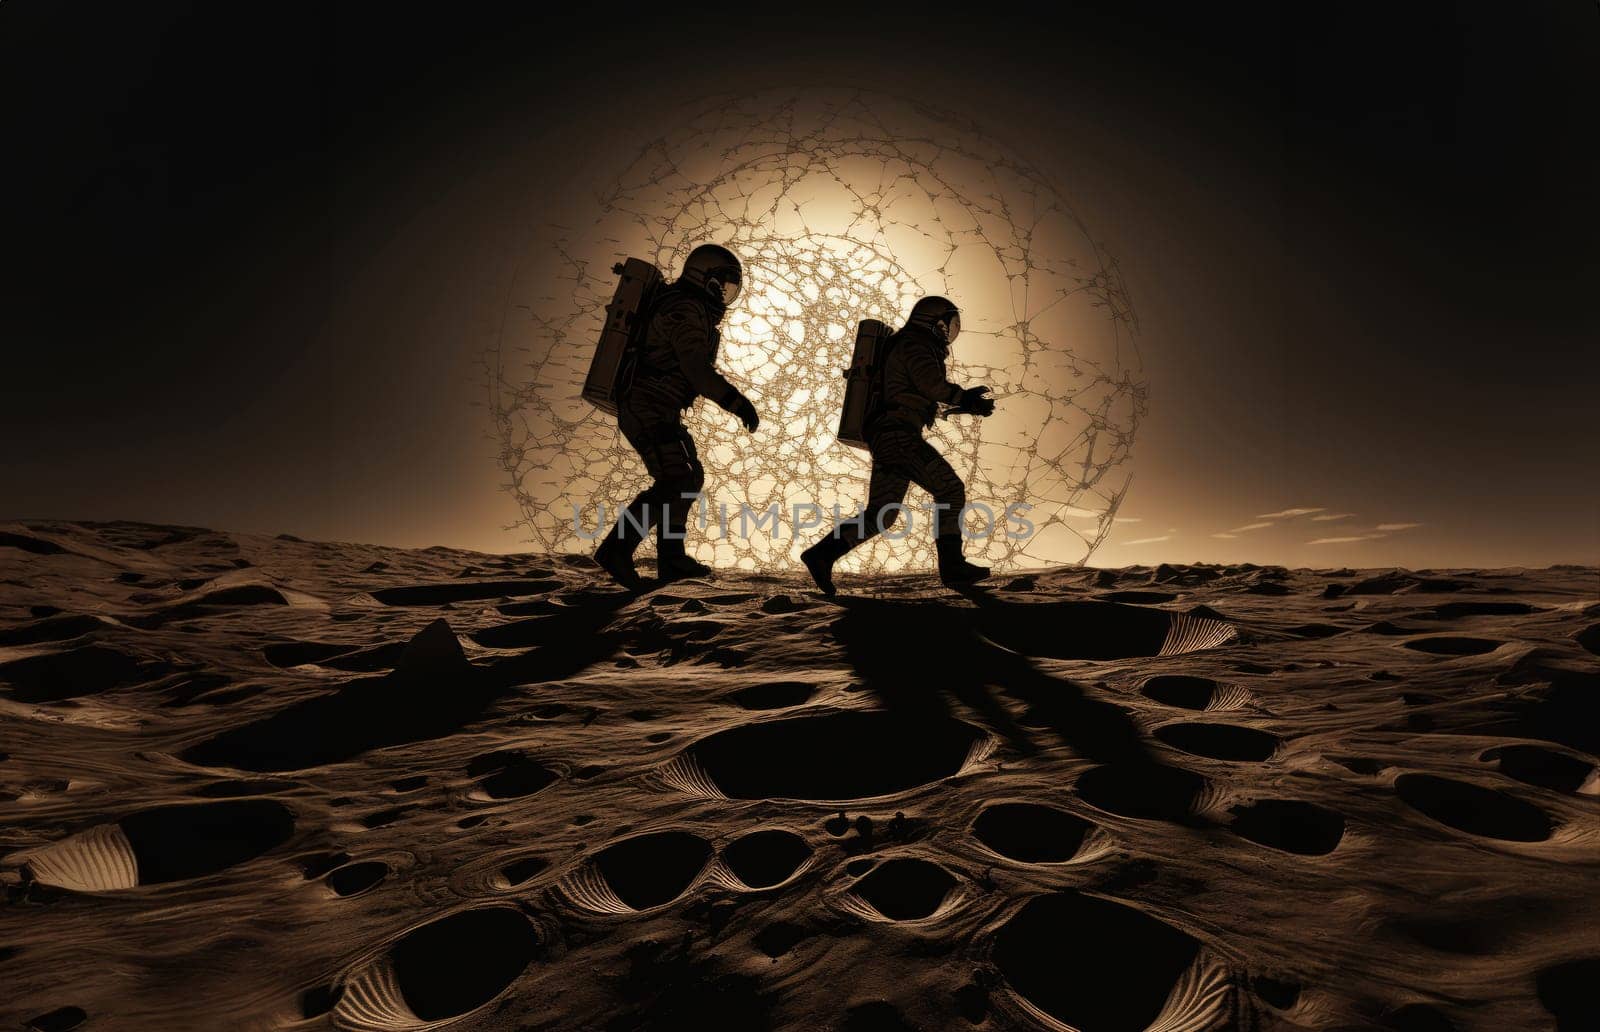 Astronaut Duo Explores the Dark Side of the Moon.Generated image by dotshock